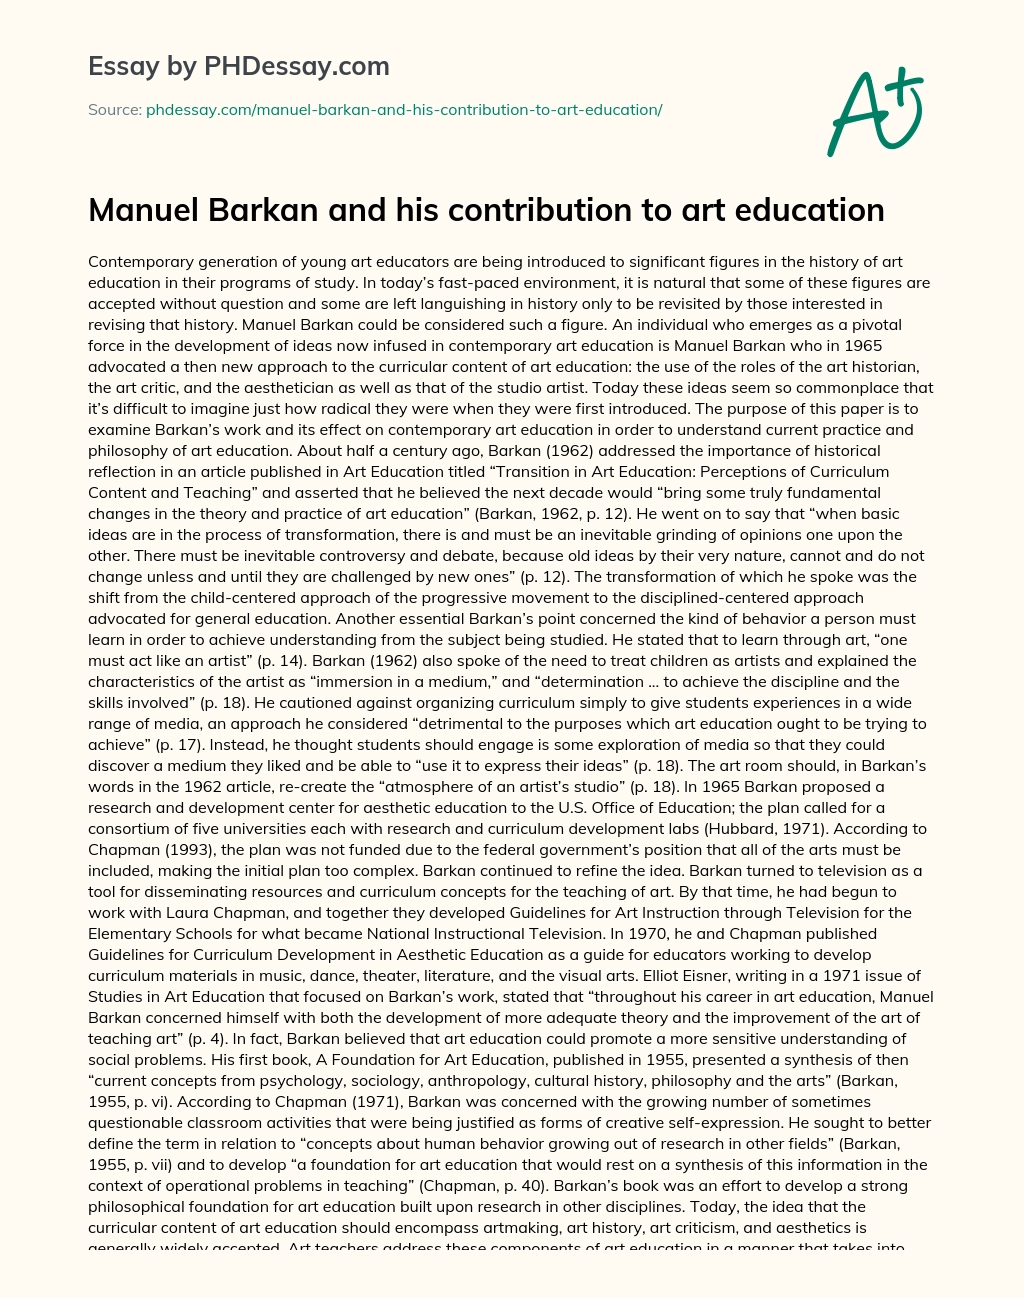 Manuel Barkan  and his contribution to art education essay